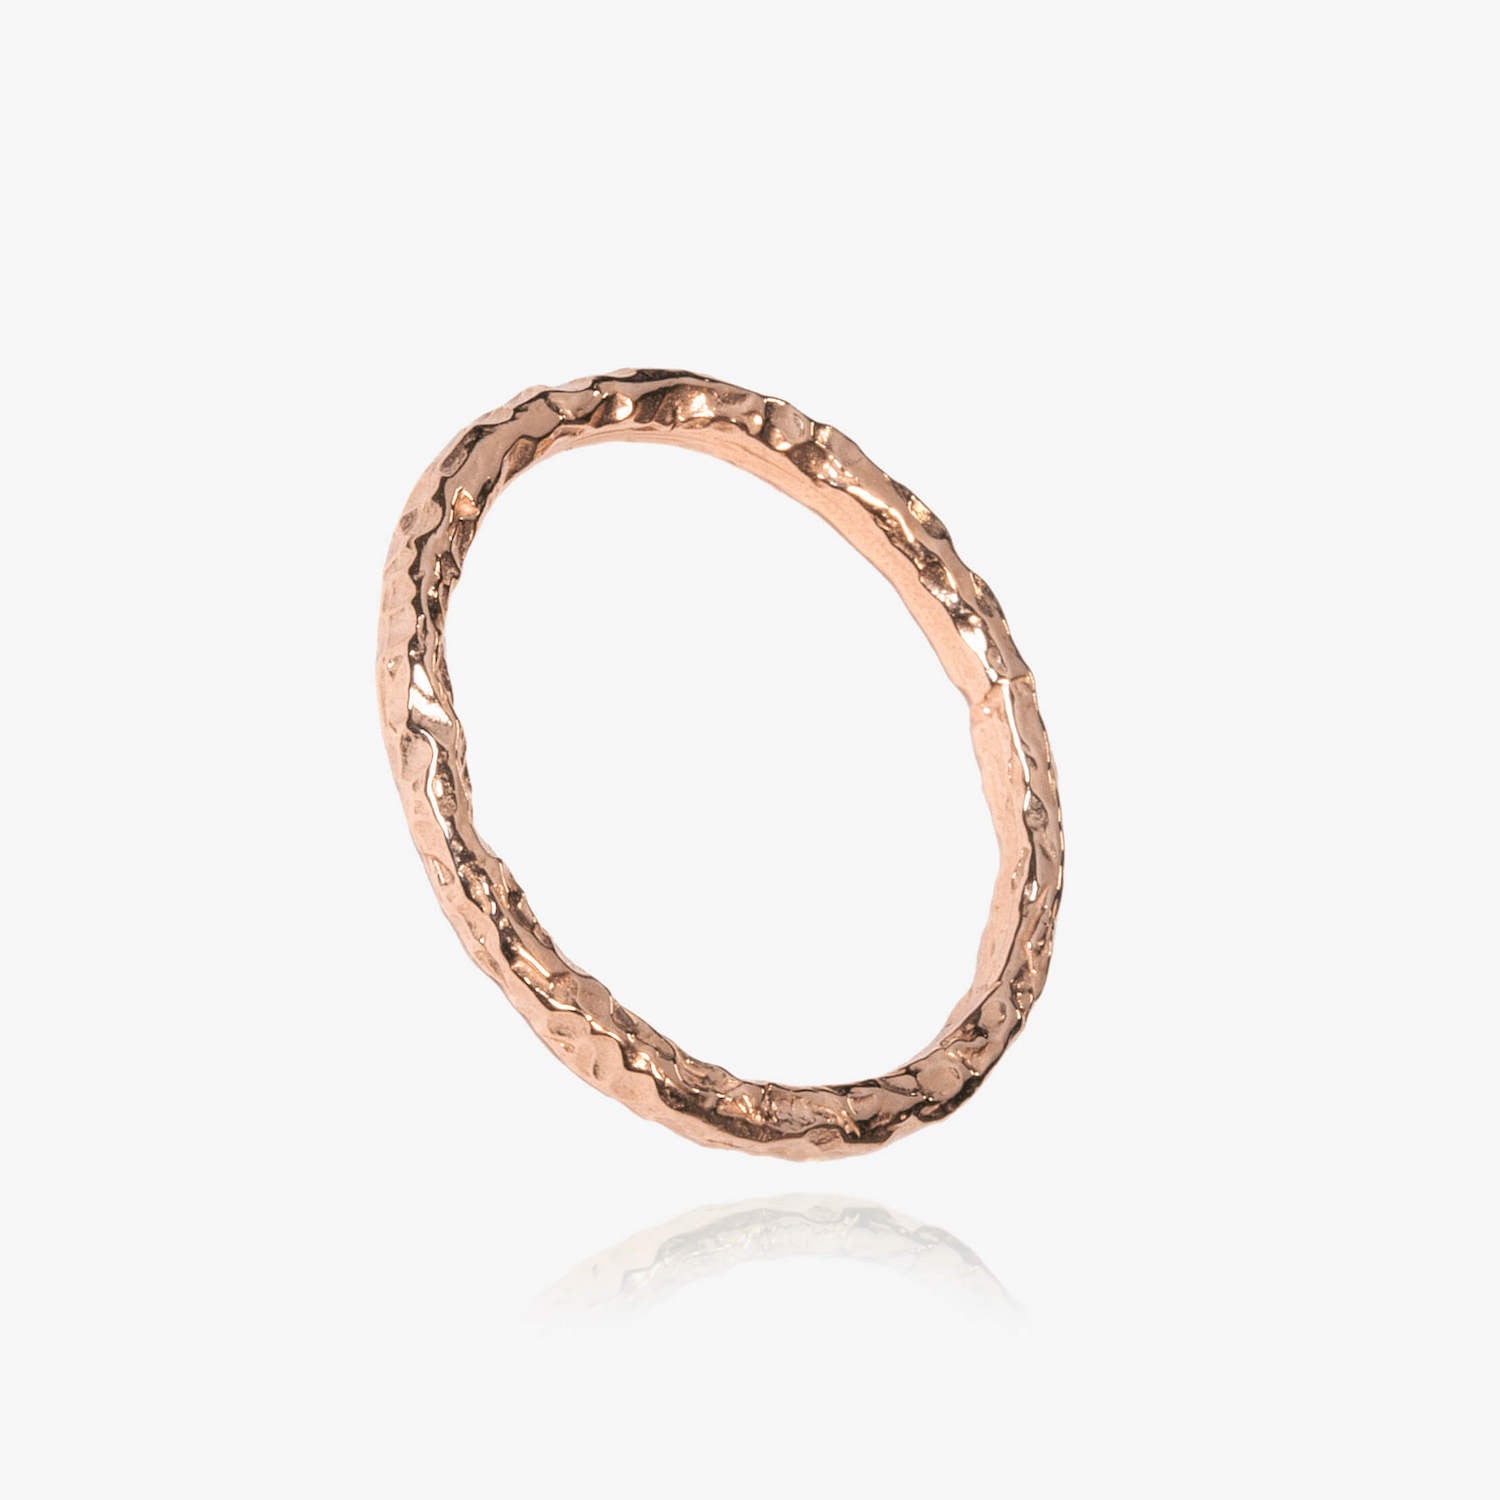 Close up of a rose gold ring with a hammered, meteorite style textured effect